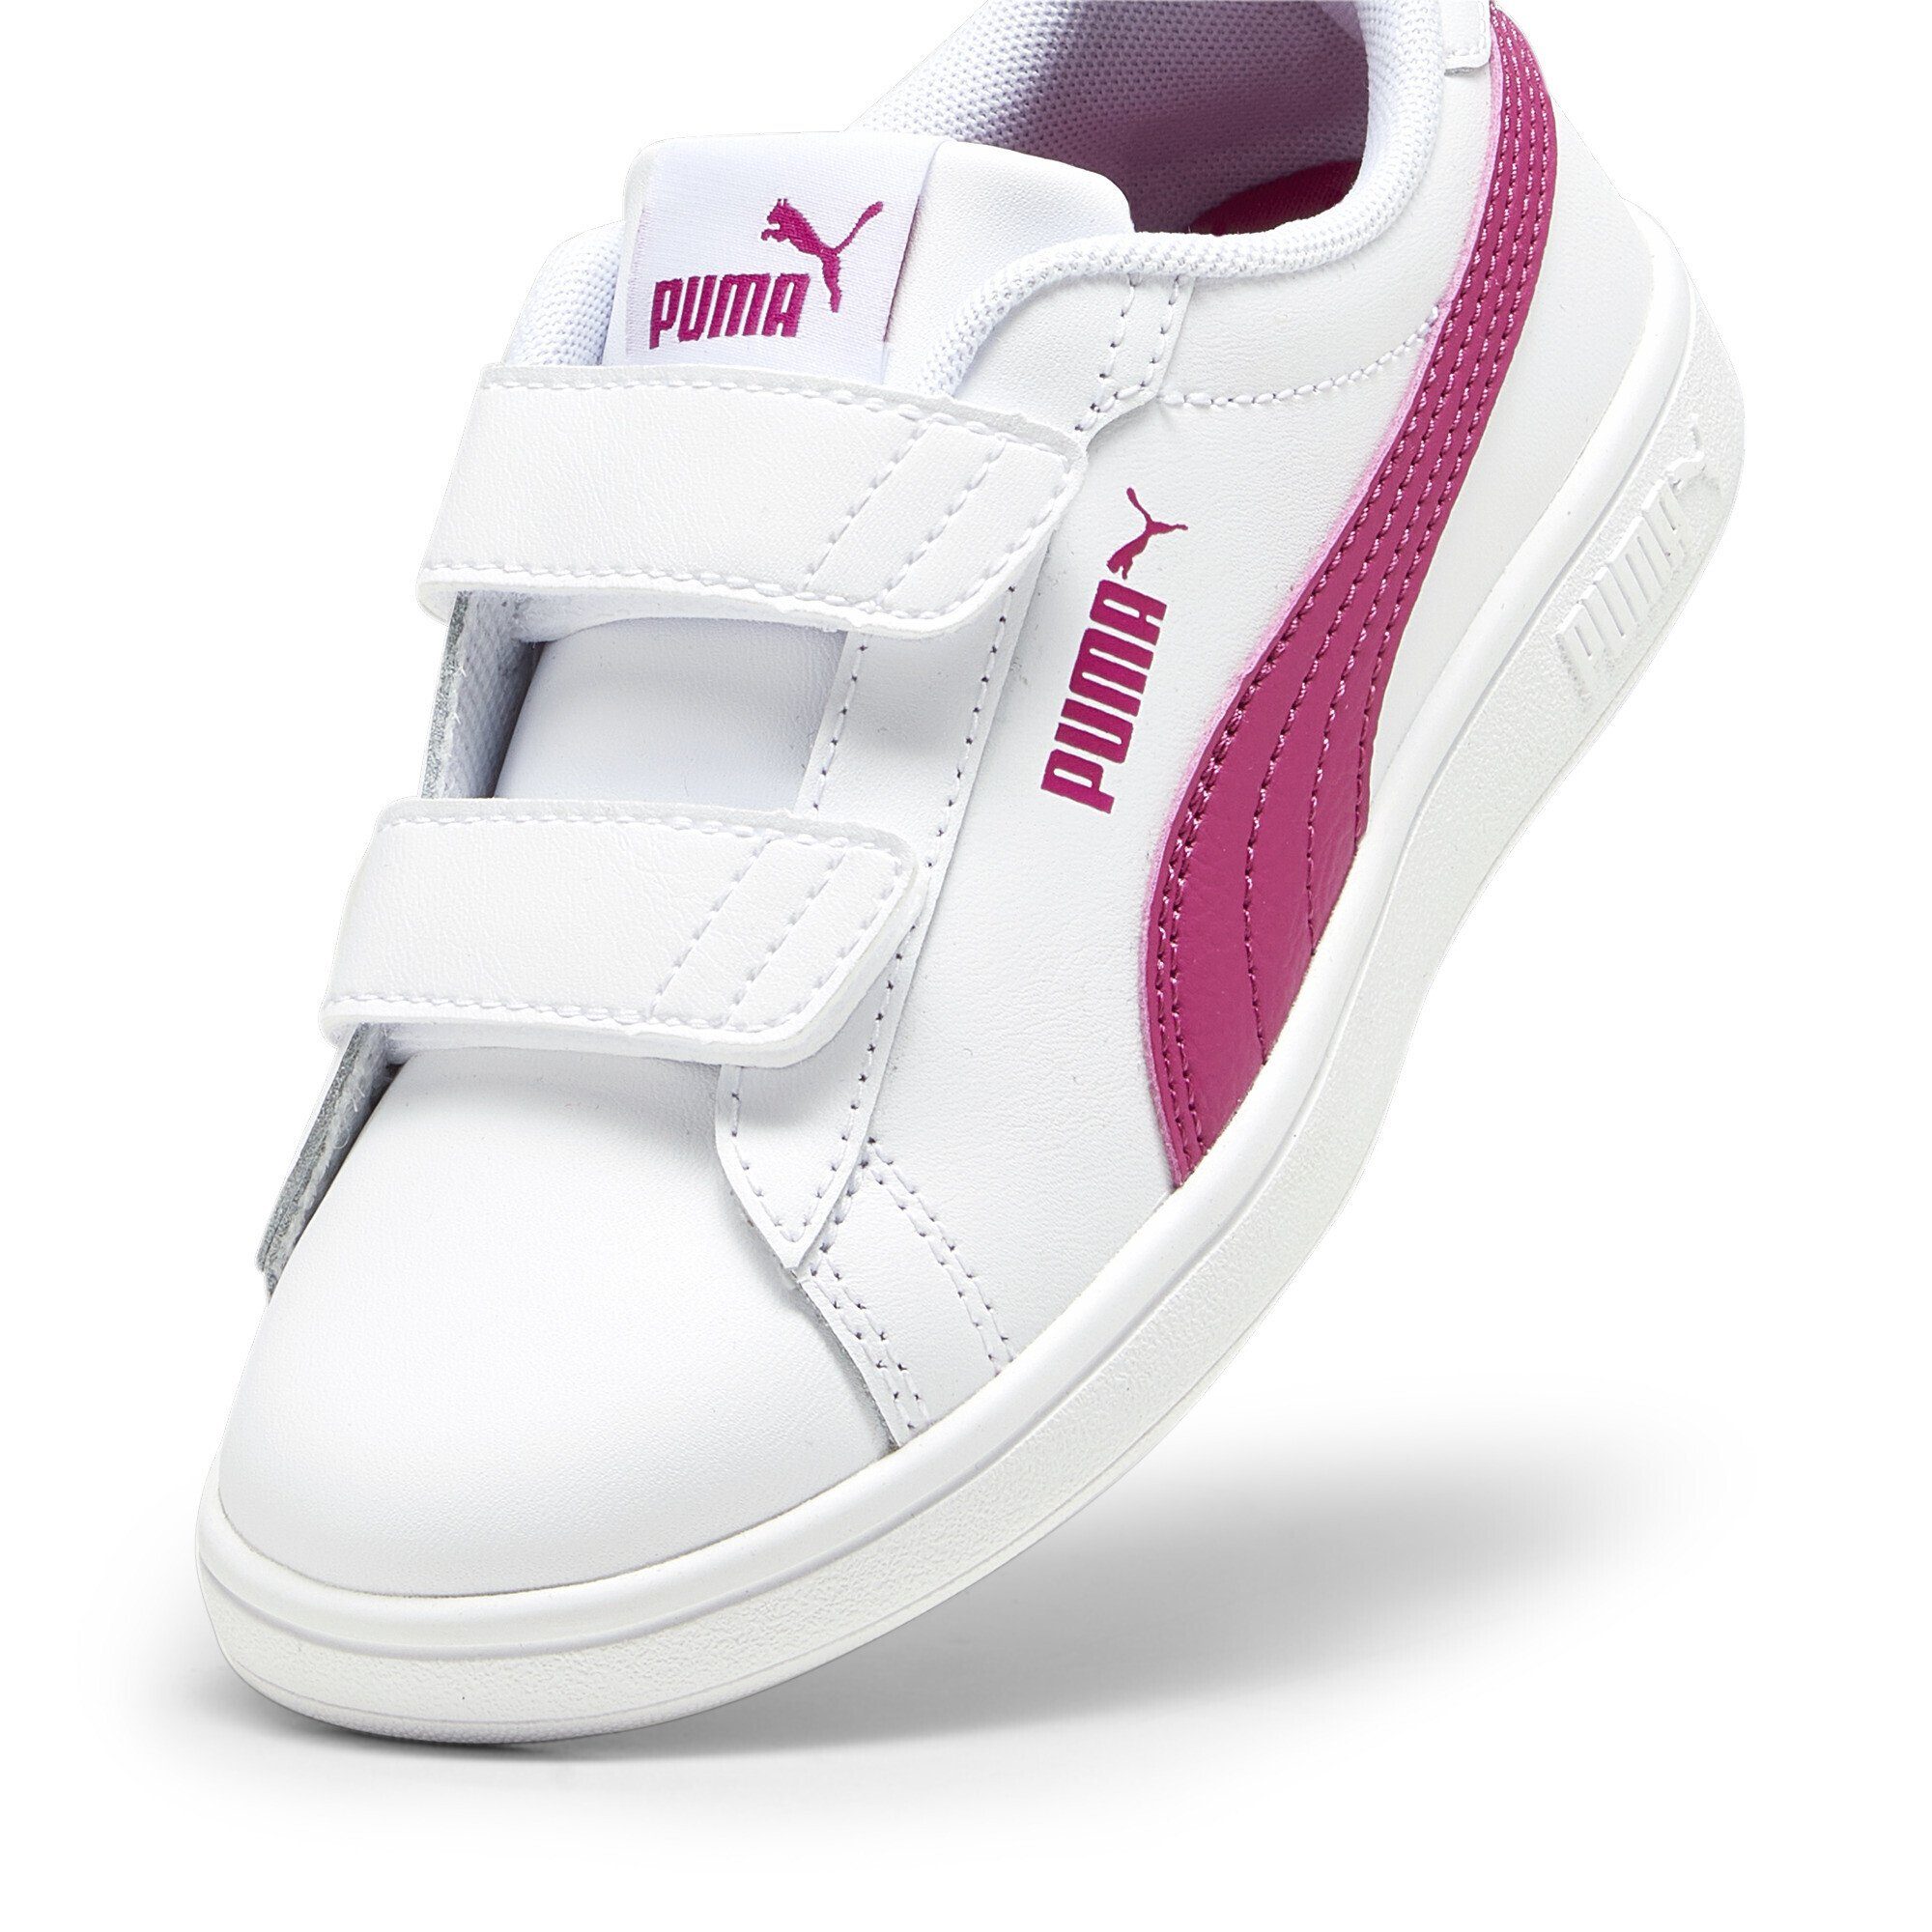 PUMA Smash Sneakers Pink Leather White Sneaker 3.0 Pinktastic